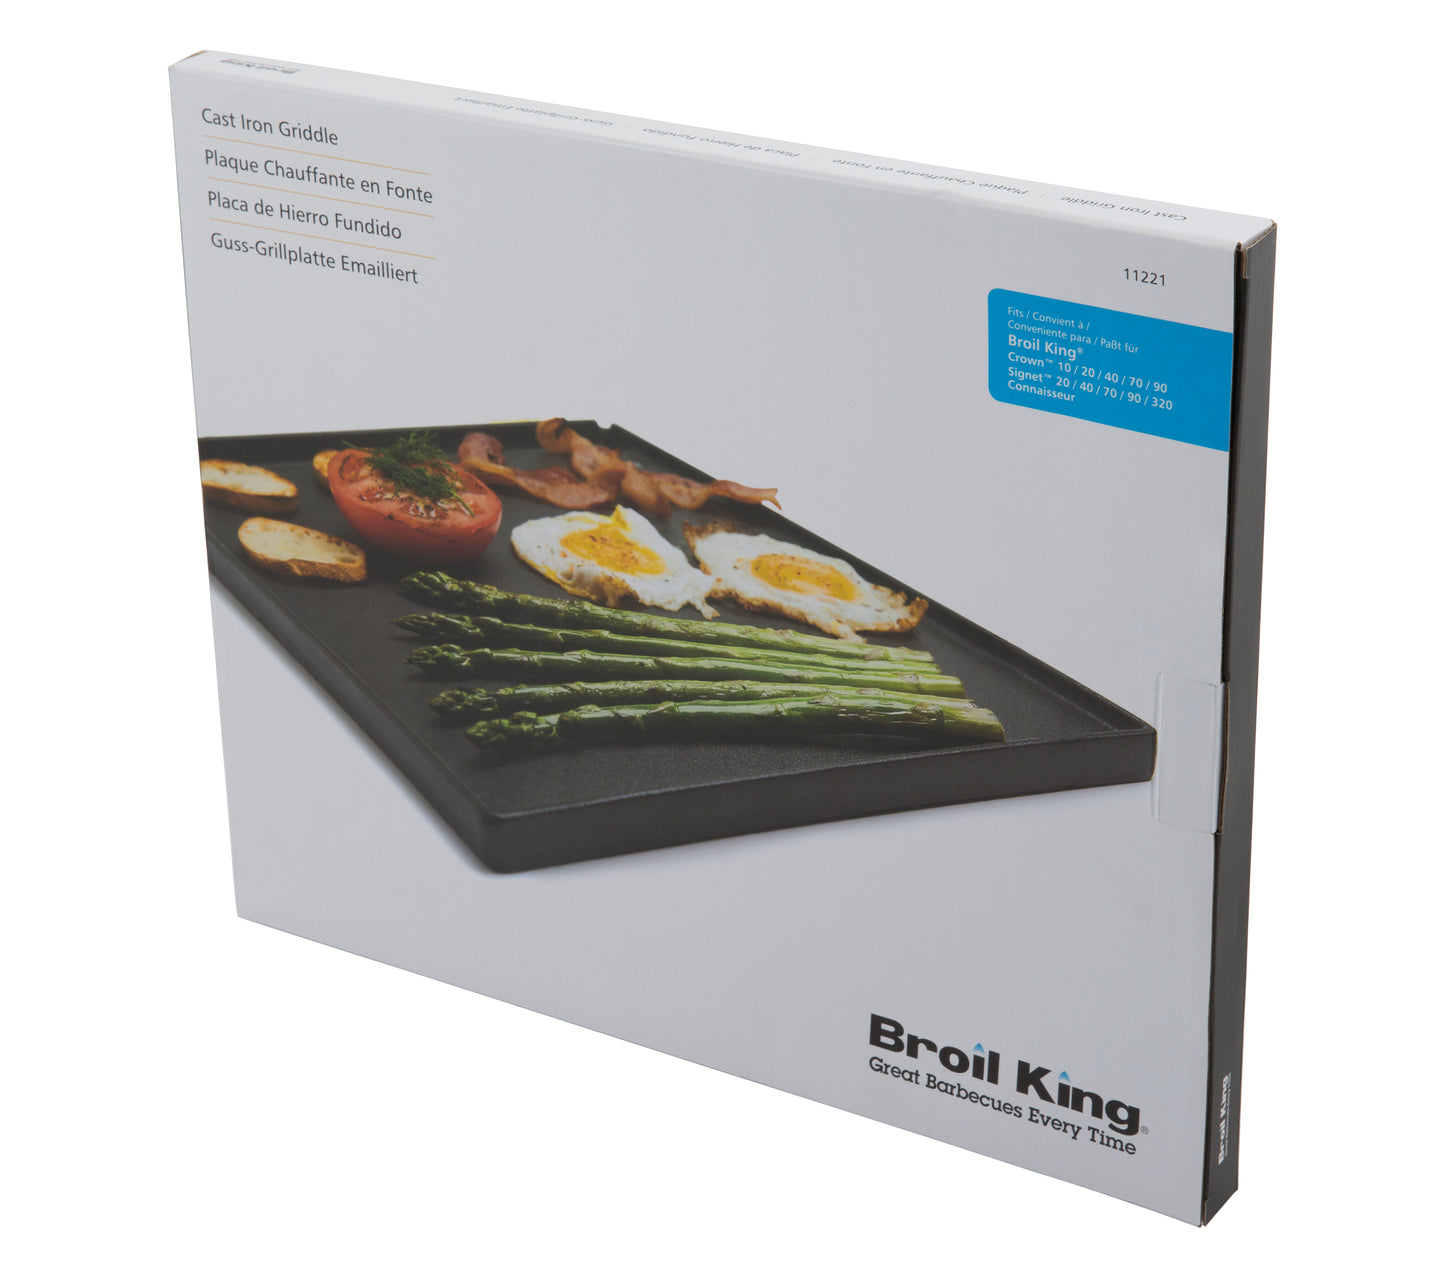 Broil King Hot Plate - Signet